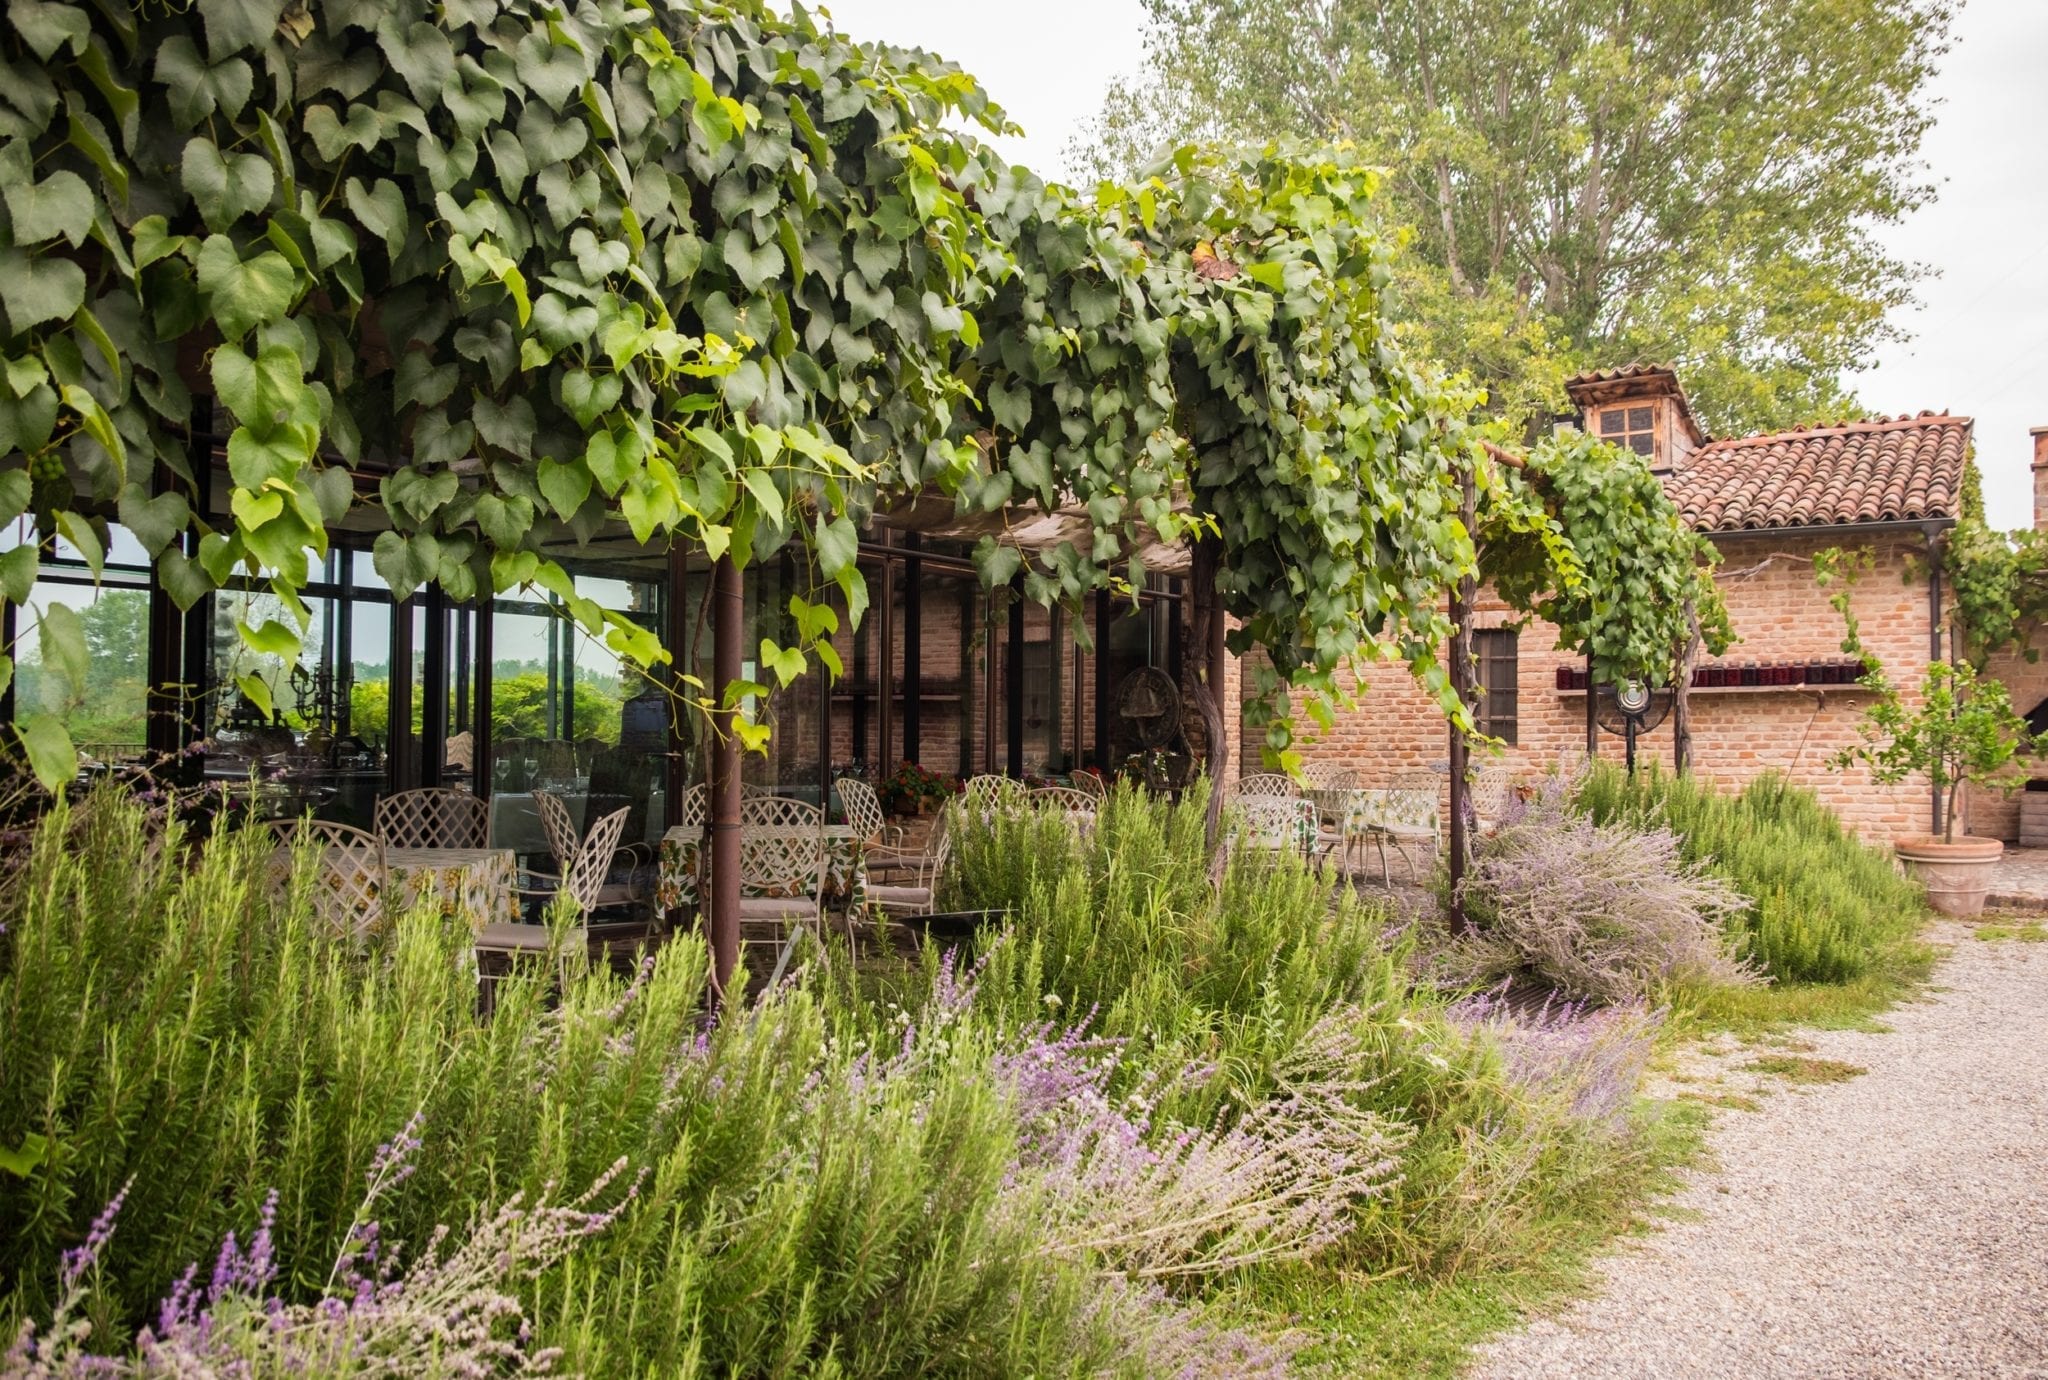 The outdoor dining area -- chairs underneath an ivy-covered trellis, surrounded by lavender bushes, red brick buildings in the background.